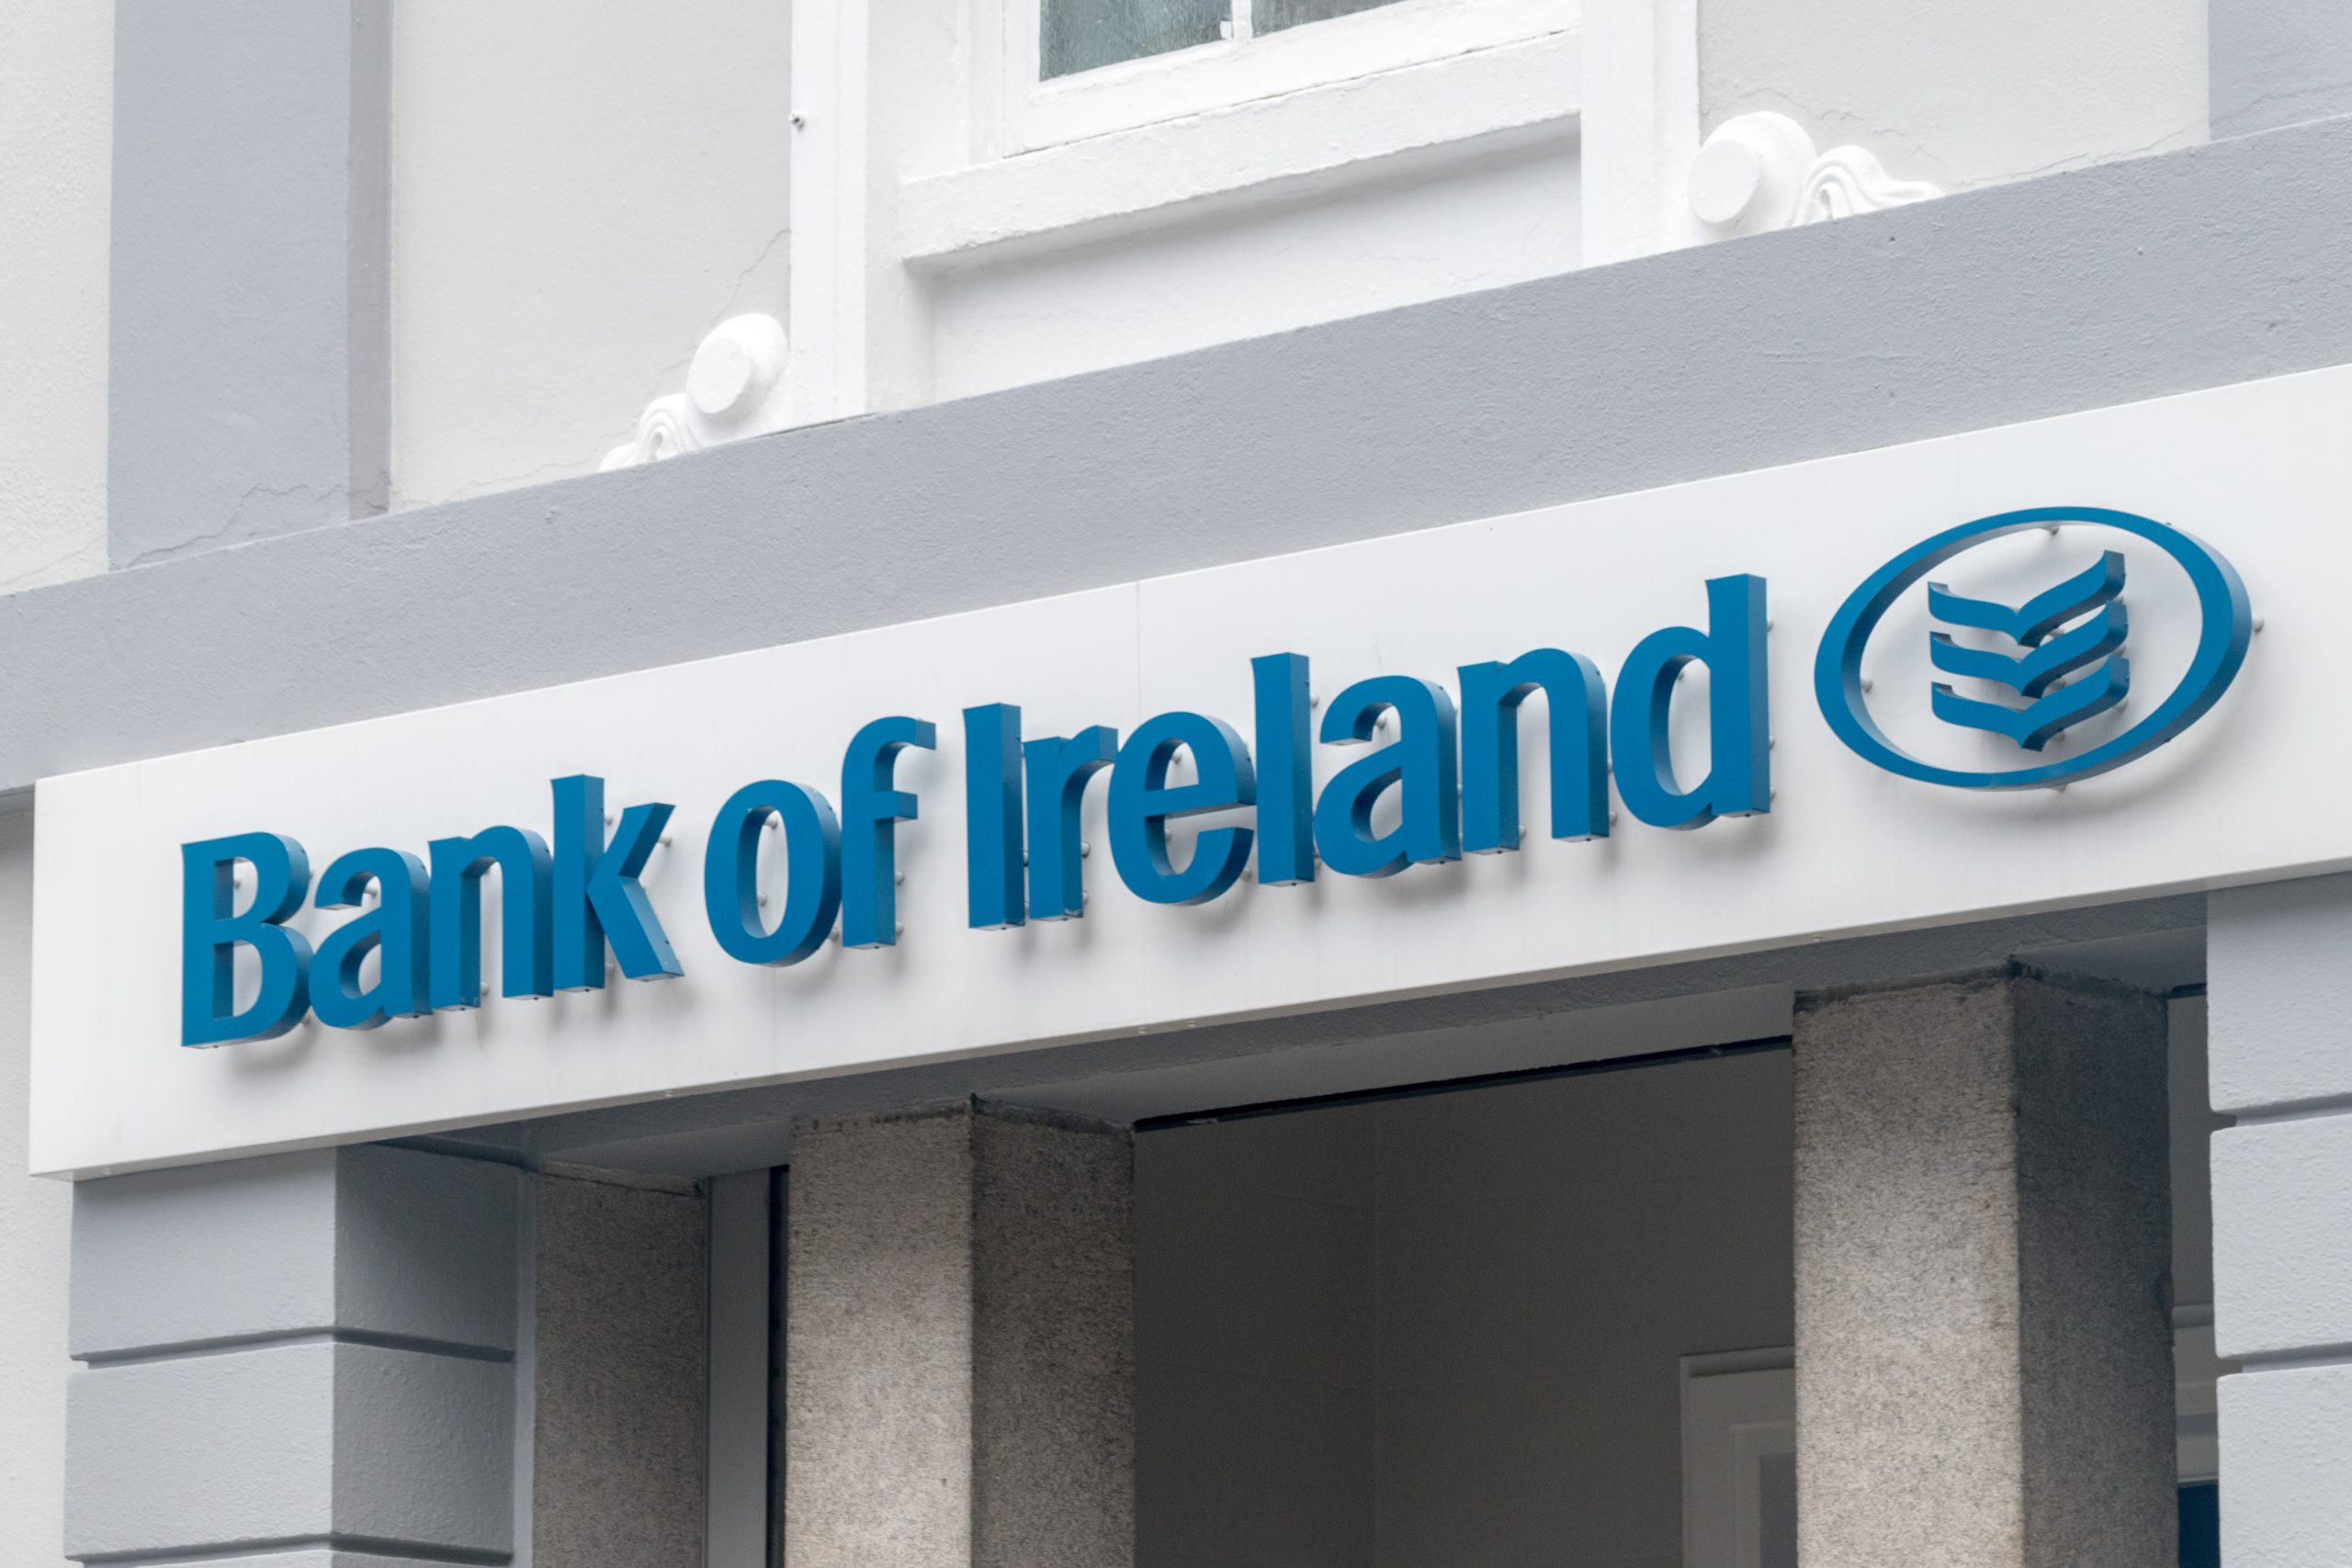 Bank of Ireland announces refurbishment plans for two NI branches in 2023